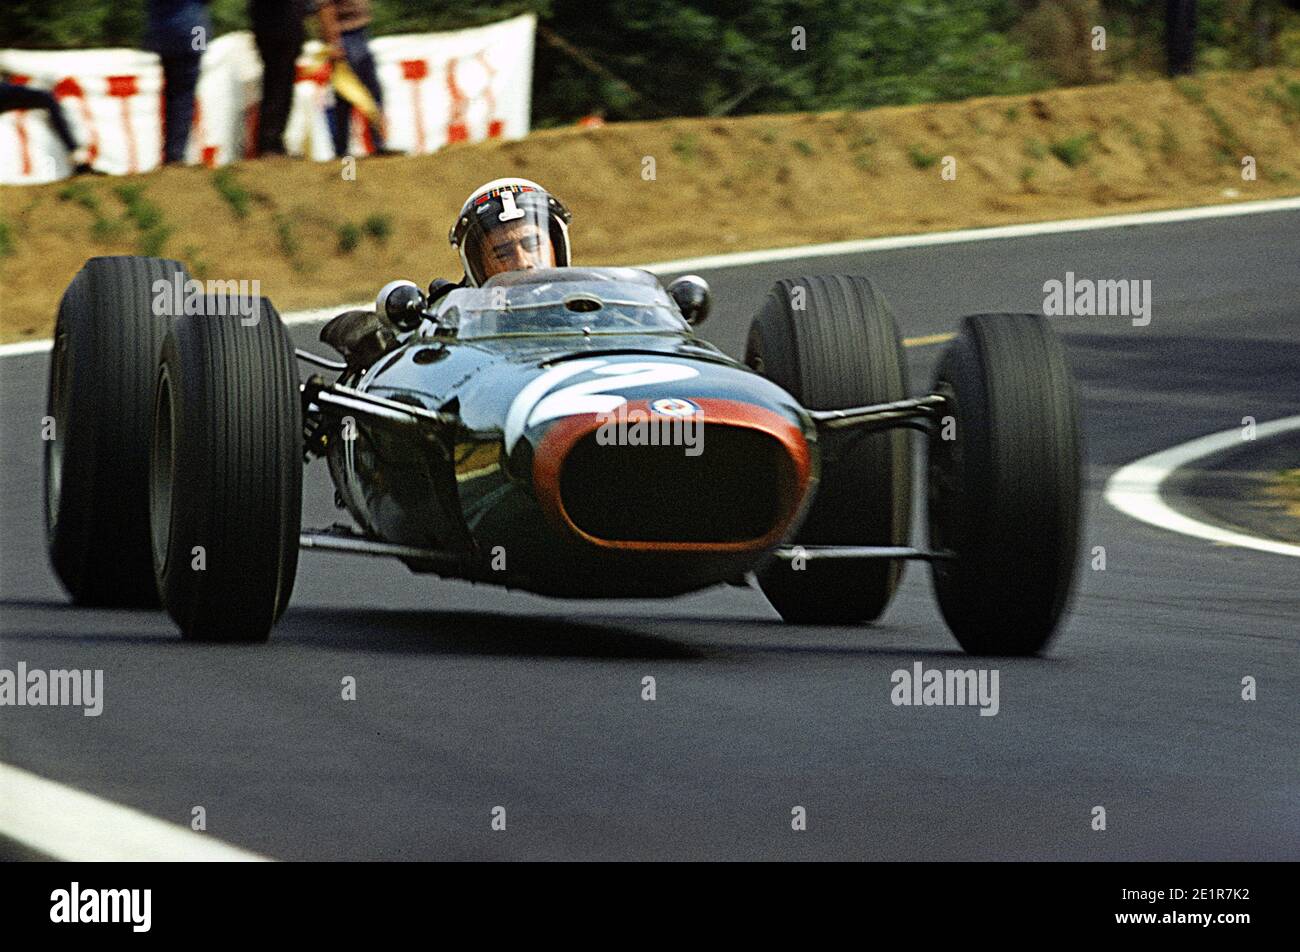 Jackie STEWART driving BRM F1 car in full speed during 1965 Grand Prix de France, in Charade circuit near Clermont-Ferrand. Stock Photo